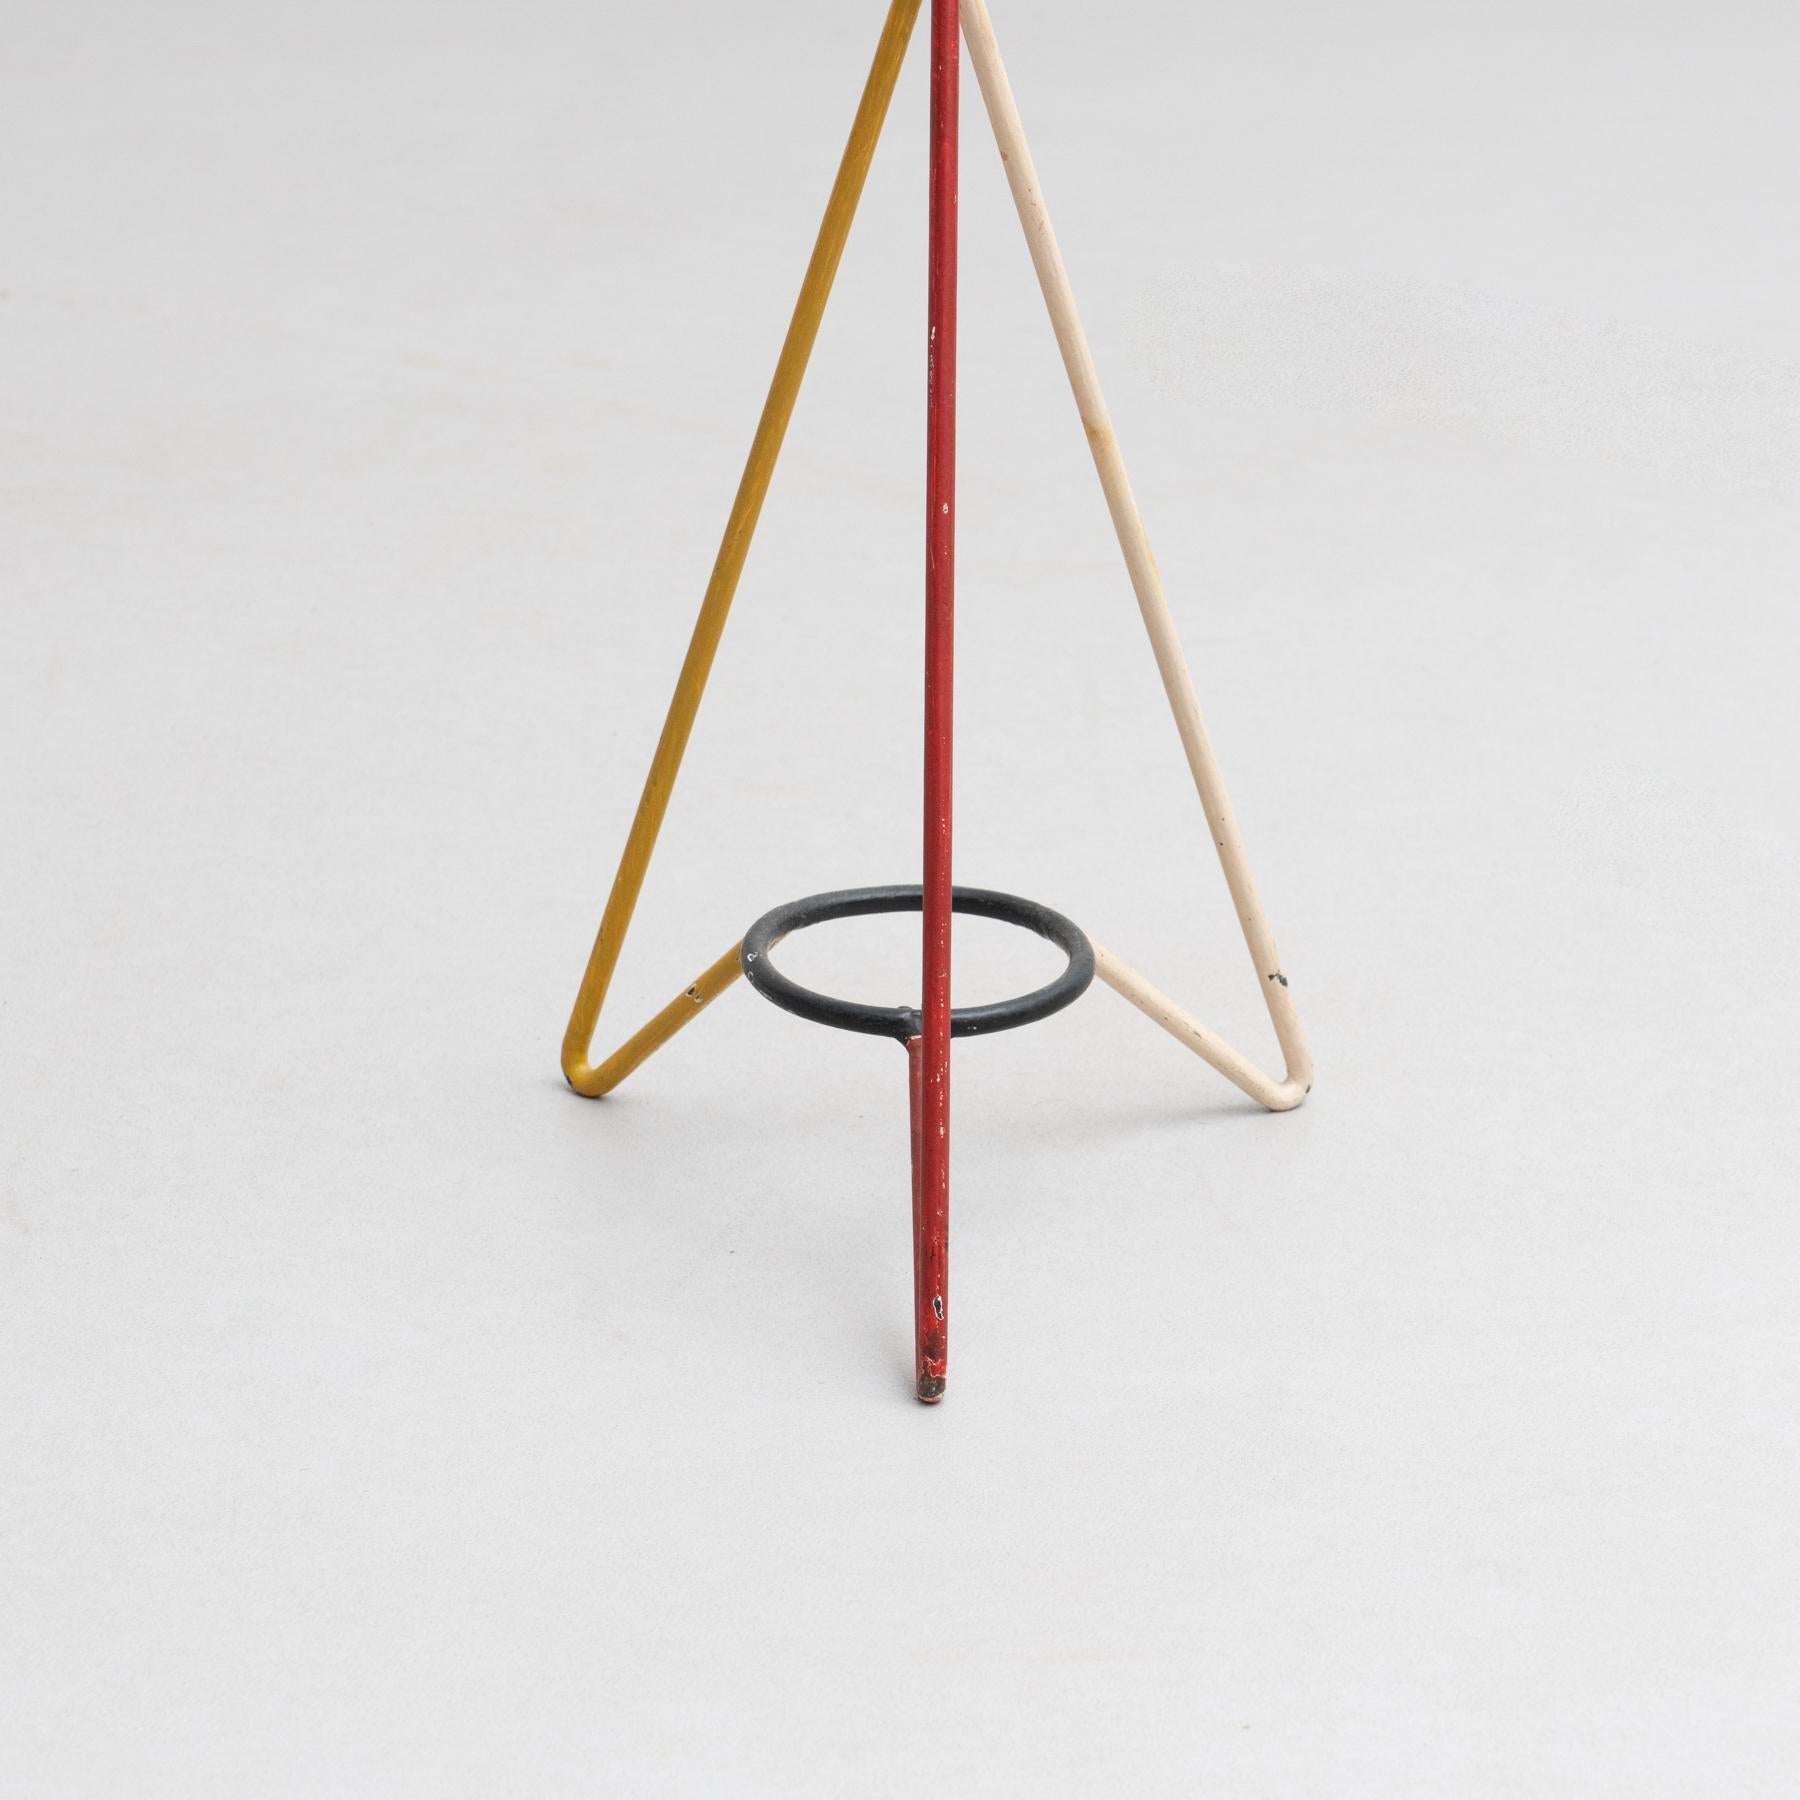 Plant stand designed by Mathieu Matégot for three pots, circa 1950.

Manufactured in France.

Materials:
Lacquered metal.

In good original condition, with minor wear consistent with age and use, preserving a beautiful patina. Painted in